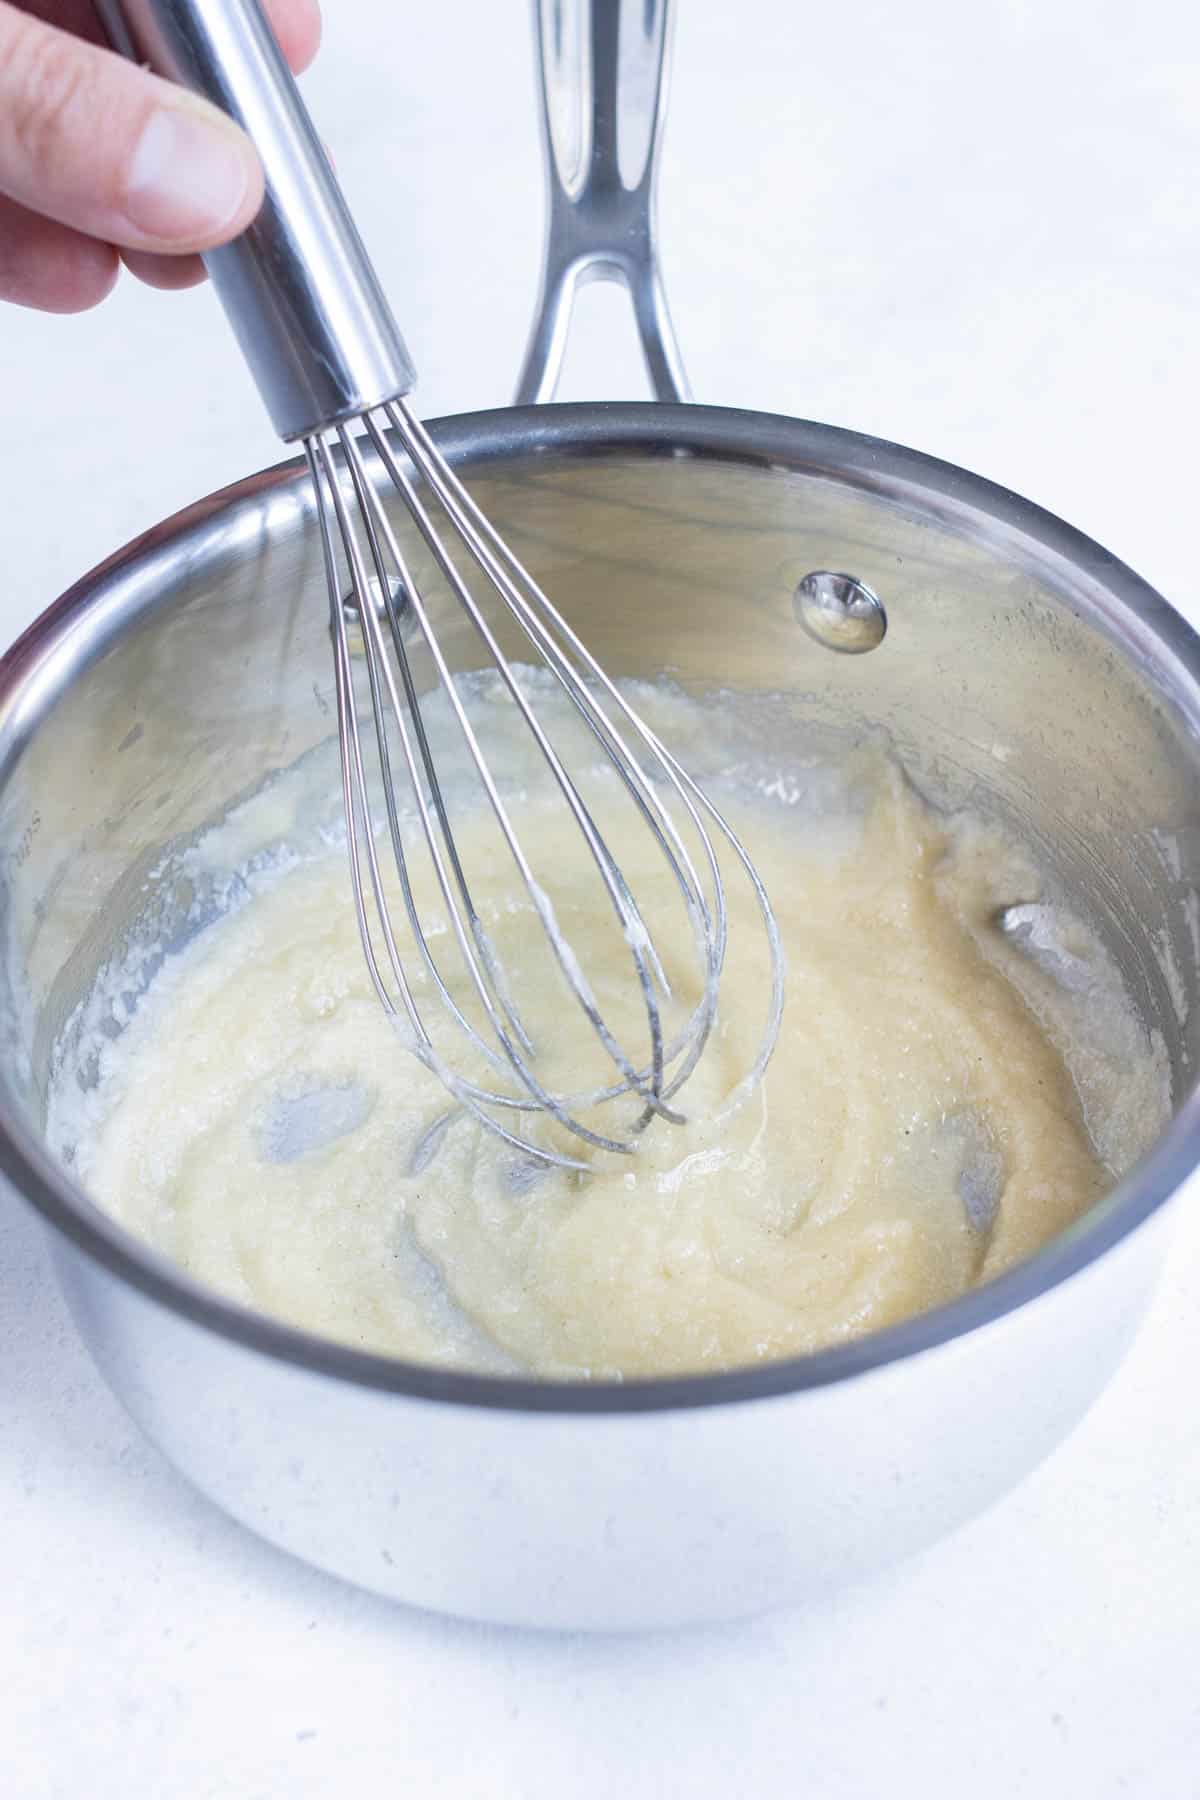 A whisk stirs the roux in a pan.